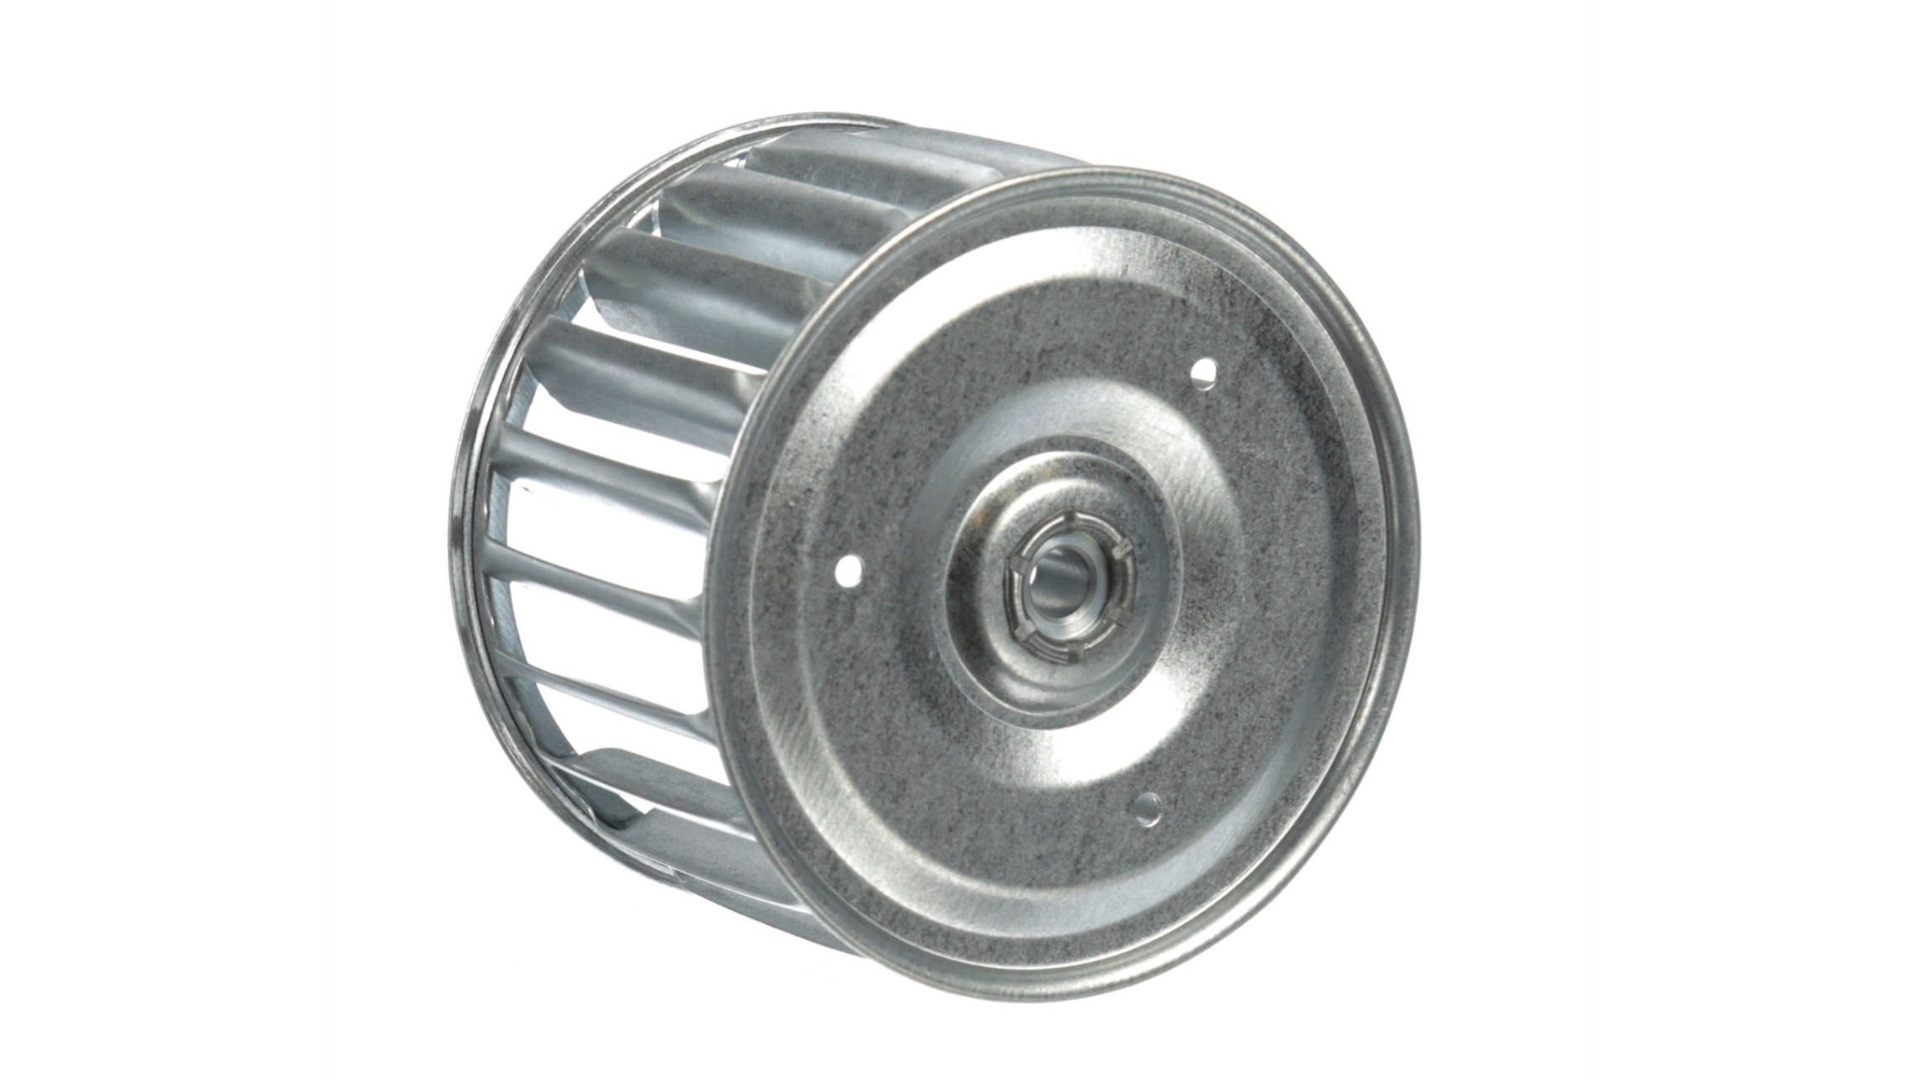 Closed end rotation of a single inlet blower wheel